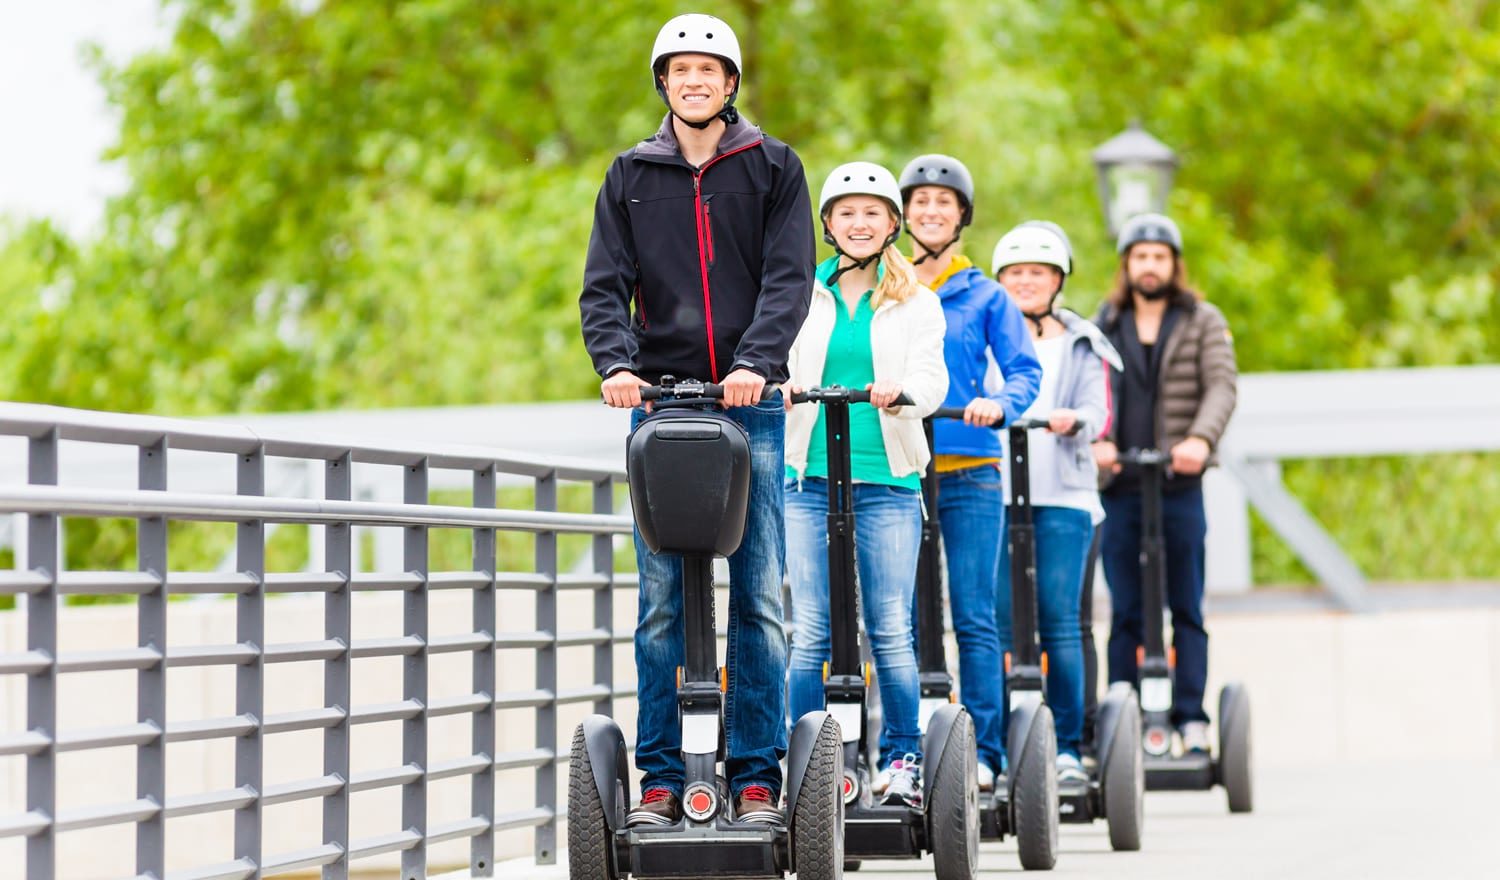 hotel kurrajong canberra attractions, segway tour